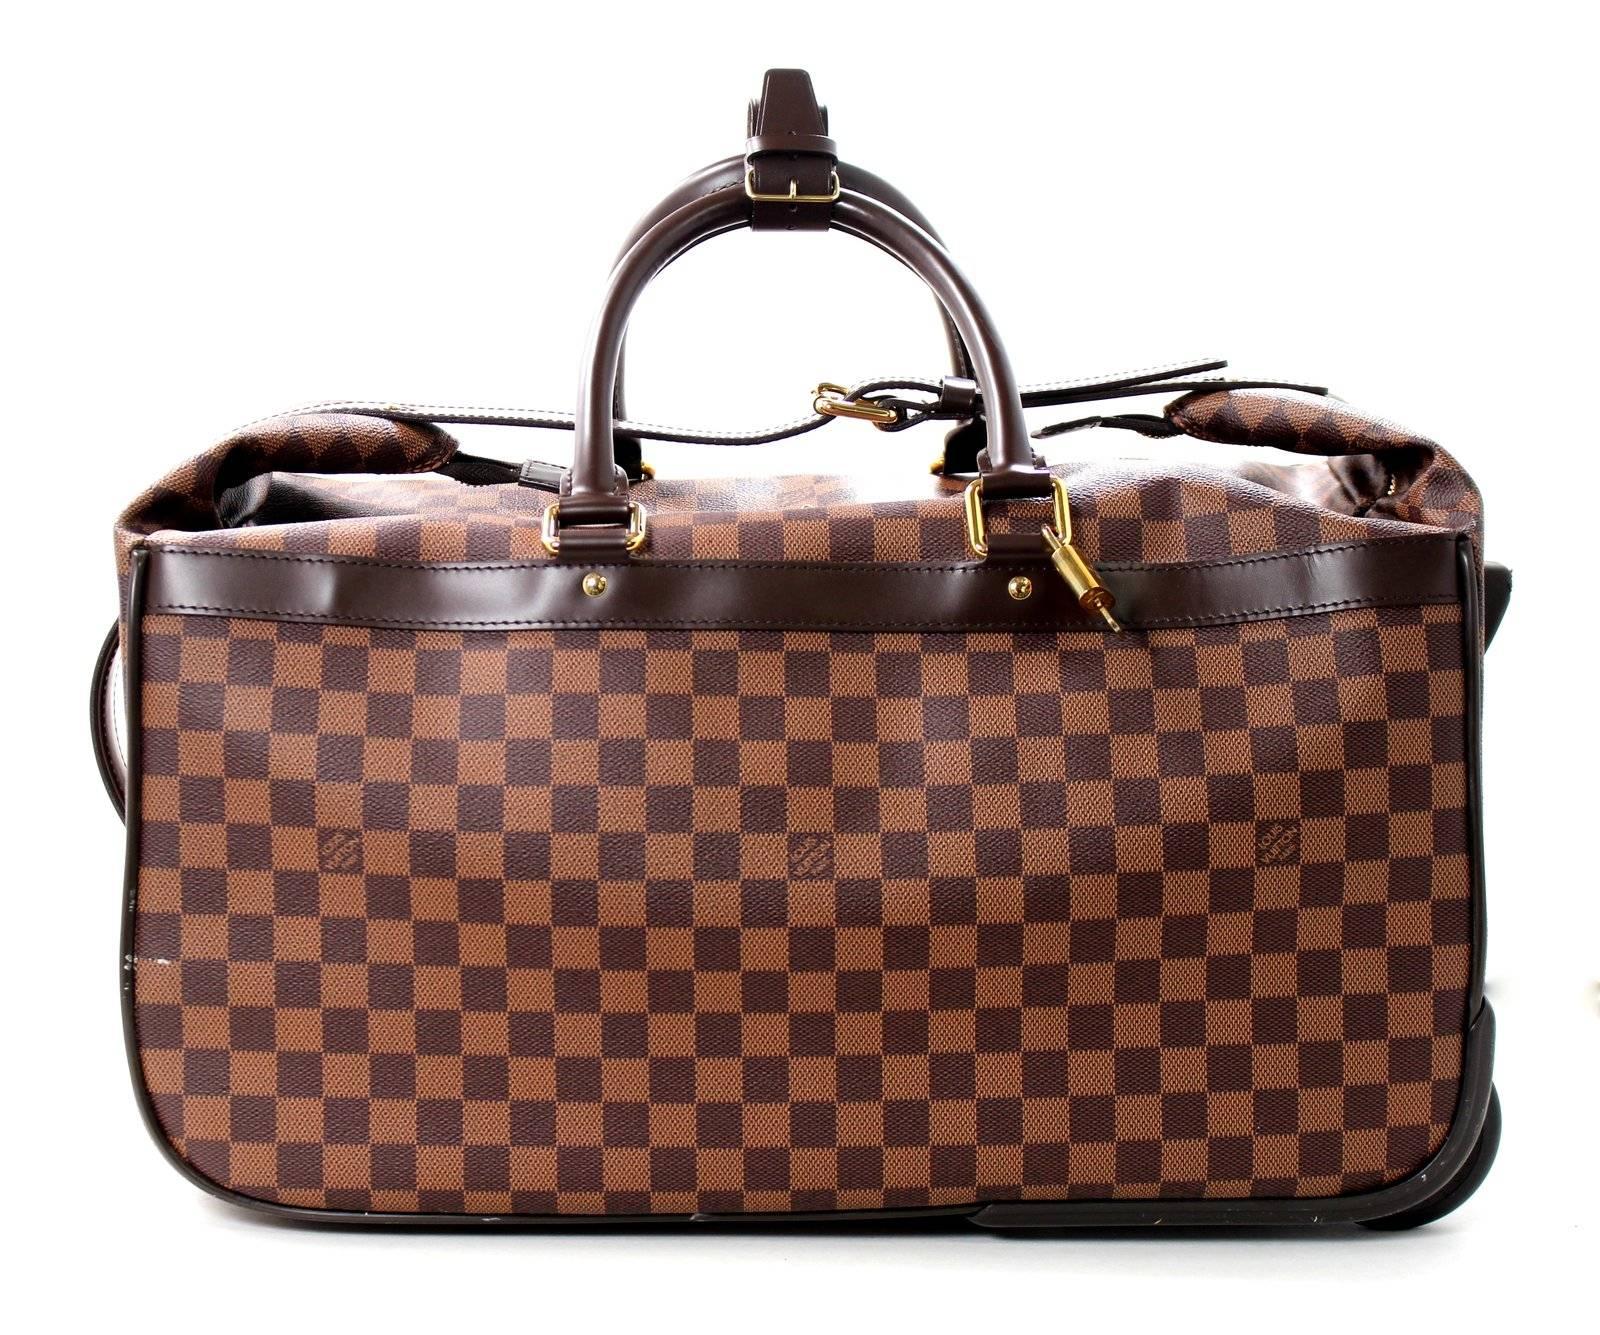 
Louis Vuitton Damier Ebene Eole 50 Rolling Travel Luggage Bag- Current value $3,000. MINT CONDITION!!!

There are minimal signs of use that are considered  normal and expected with a rolling carry-on bag.  Please review photos:  scratching by